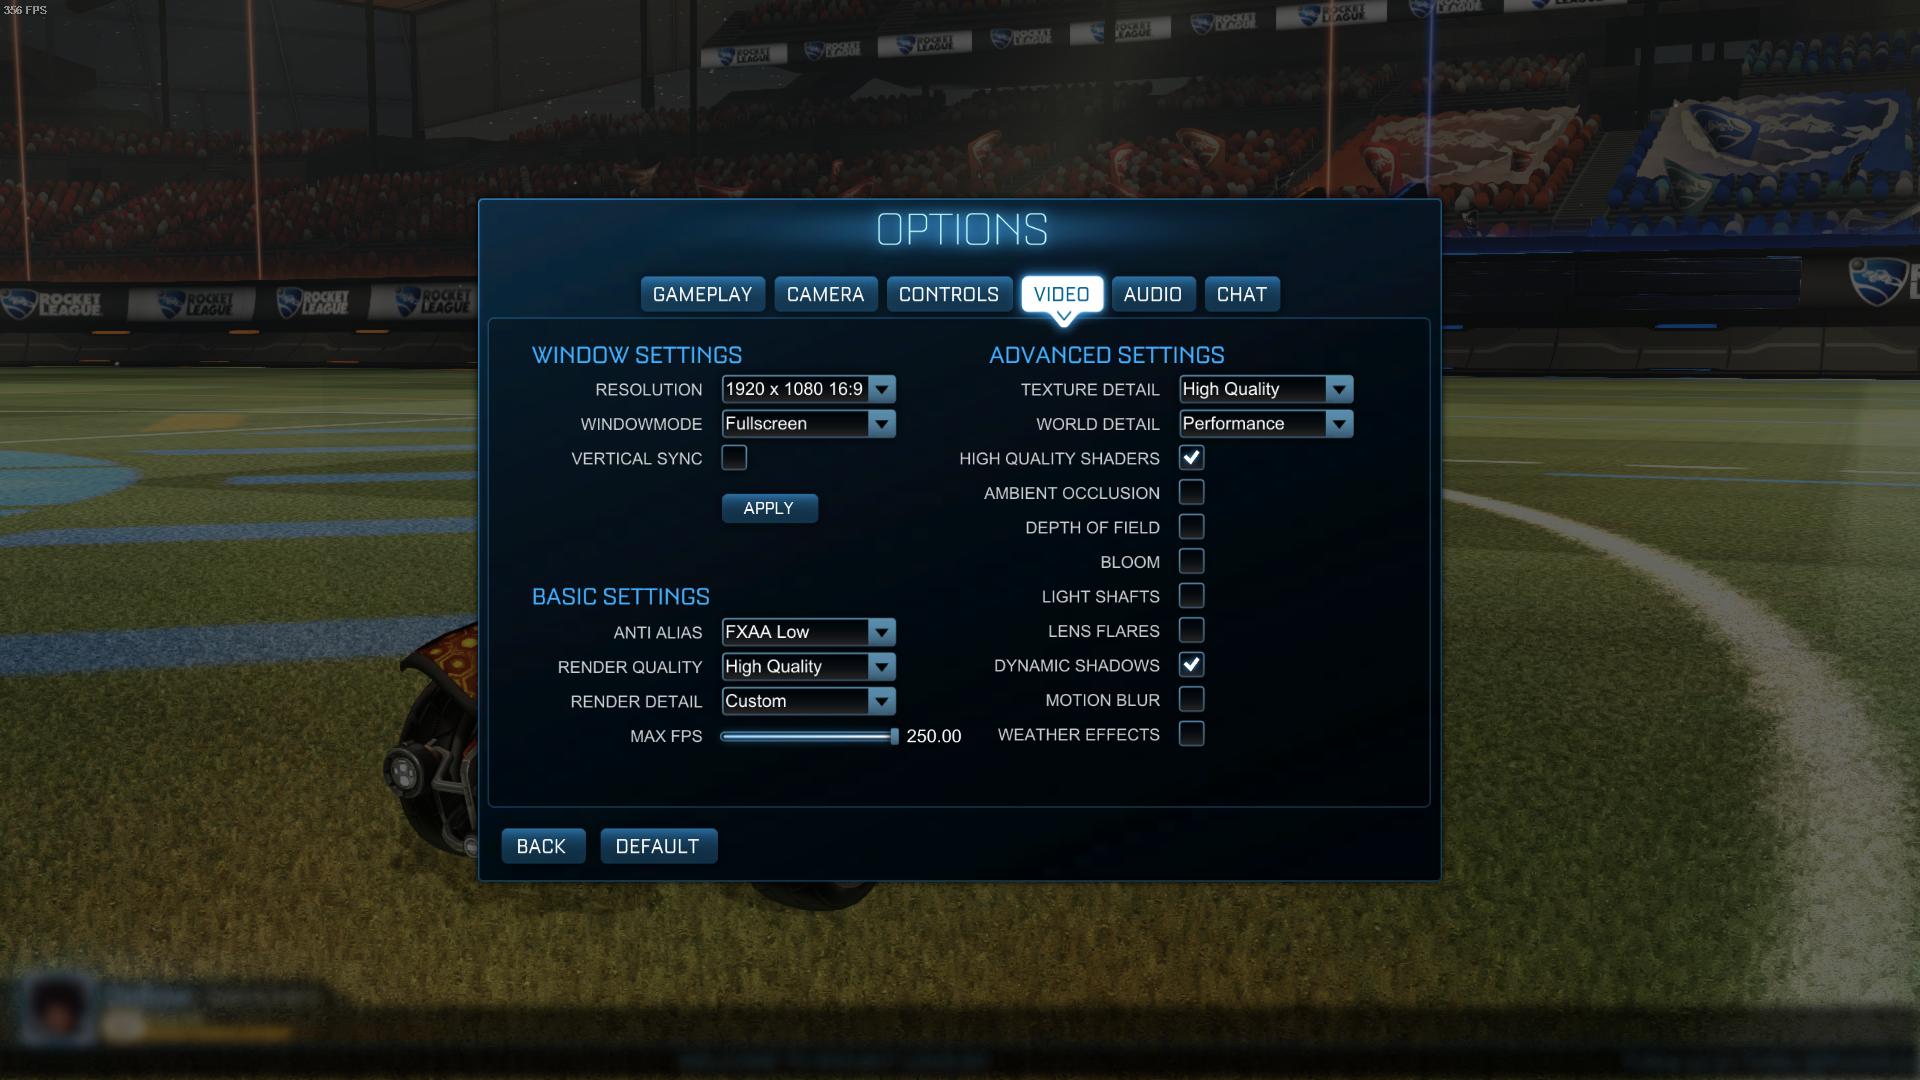 Launch Rocket League and go to the Options menu.
Go to the Video tab and reduce the settings for Texture Quality, Shadow Quality, Effects Quality, and Anti-Aliasing.